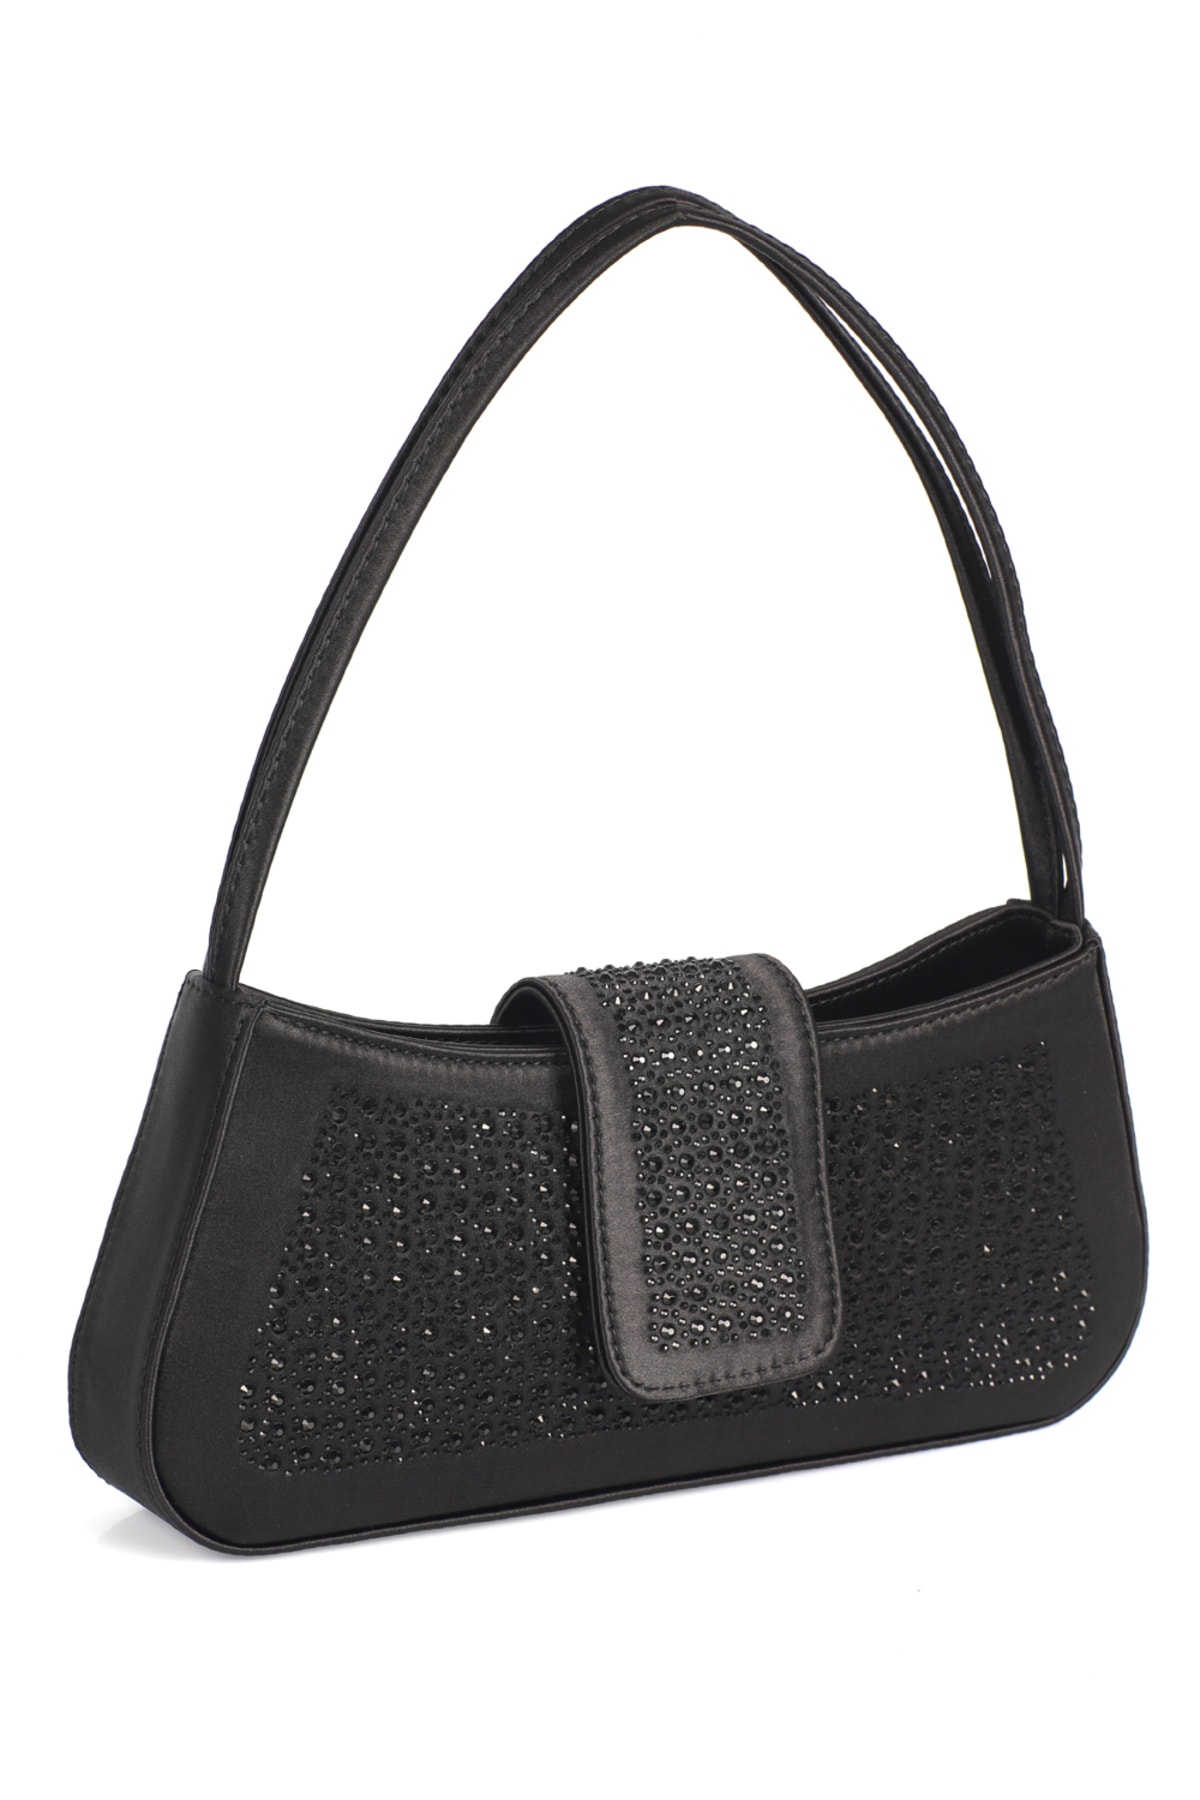 Levně Capone Outfitters Acapulco Stone Women's Bag